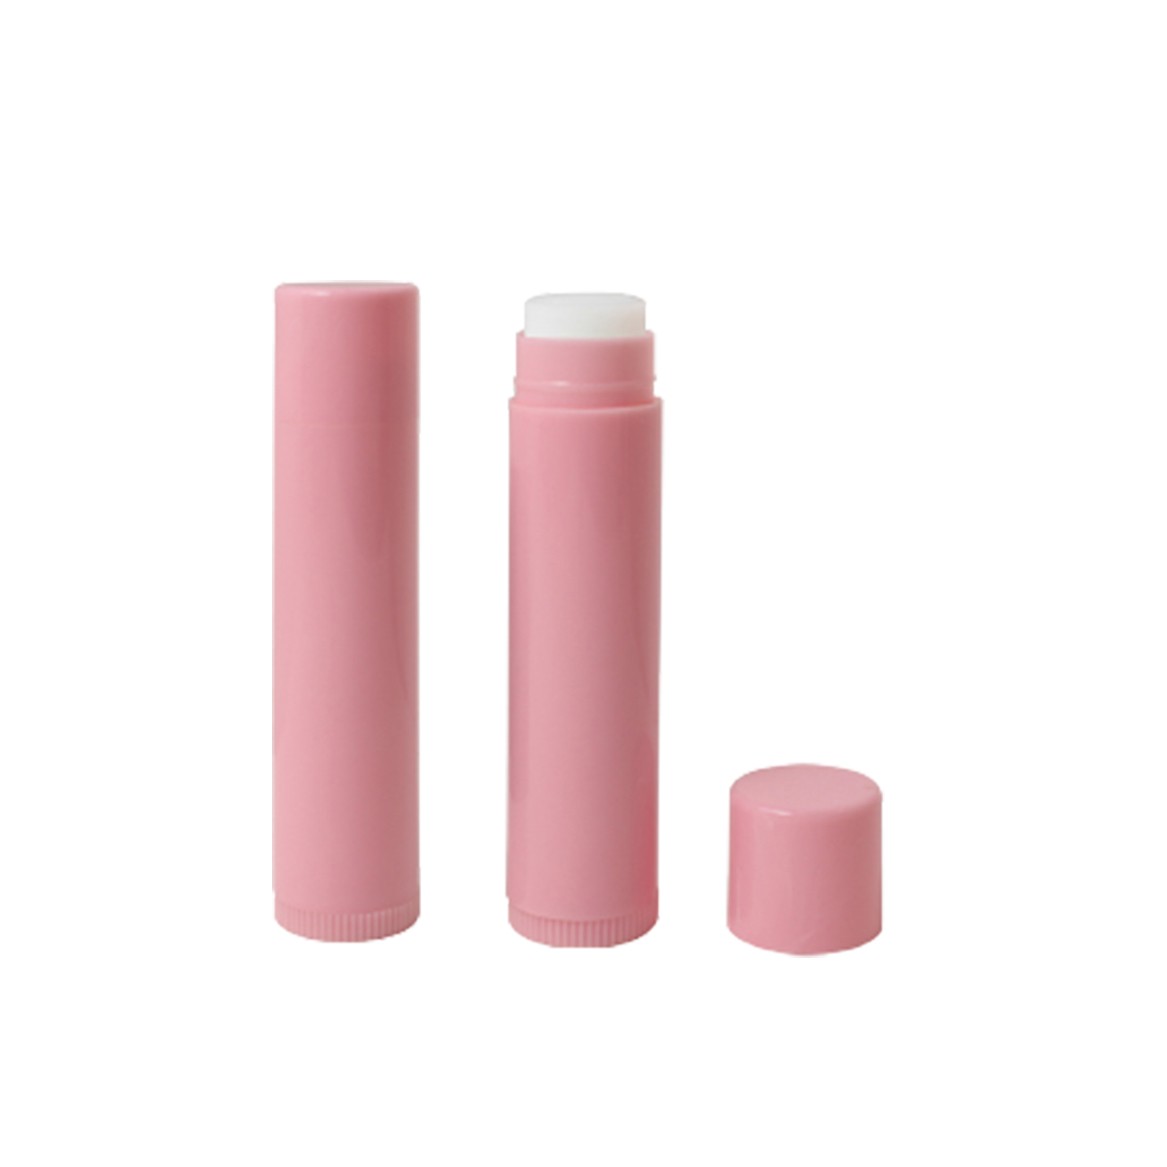 Limited edition Kiss Lip Balm Crayon, Hydrating Lip Moisturizer Infused with Natural Fruit Oils